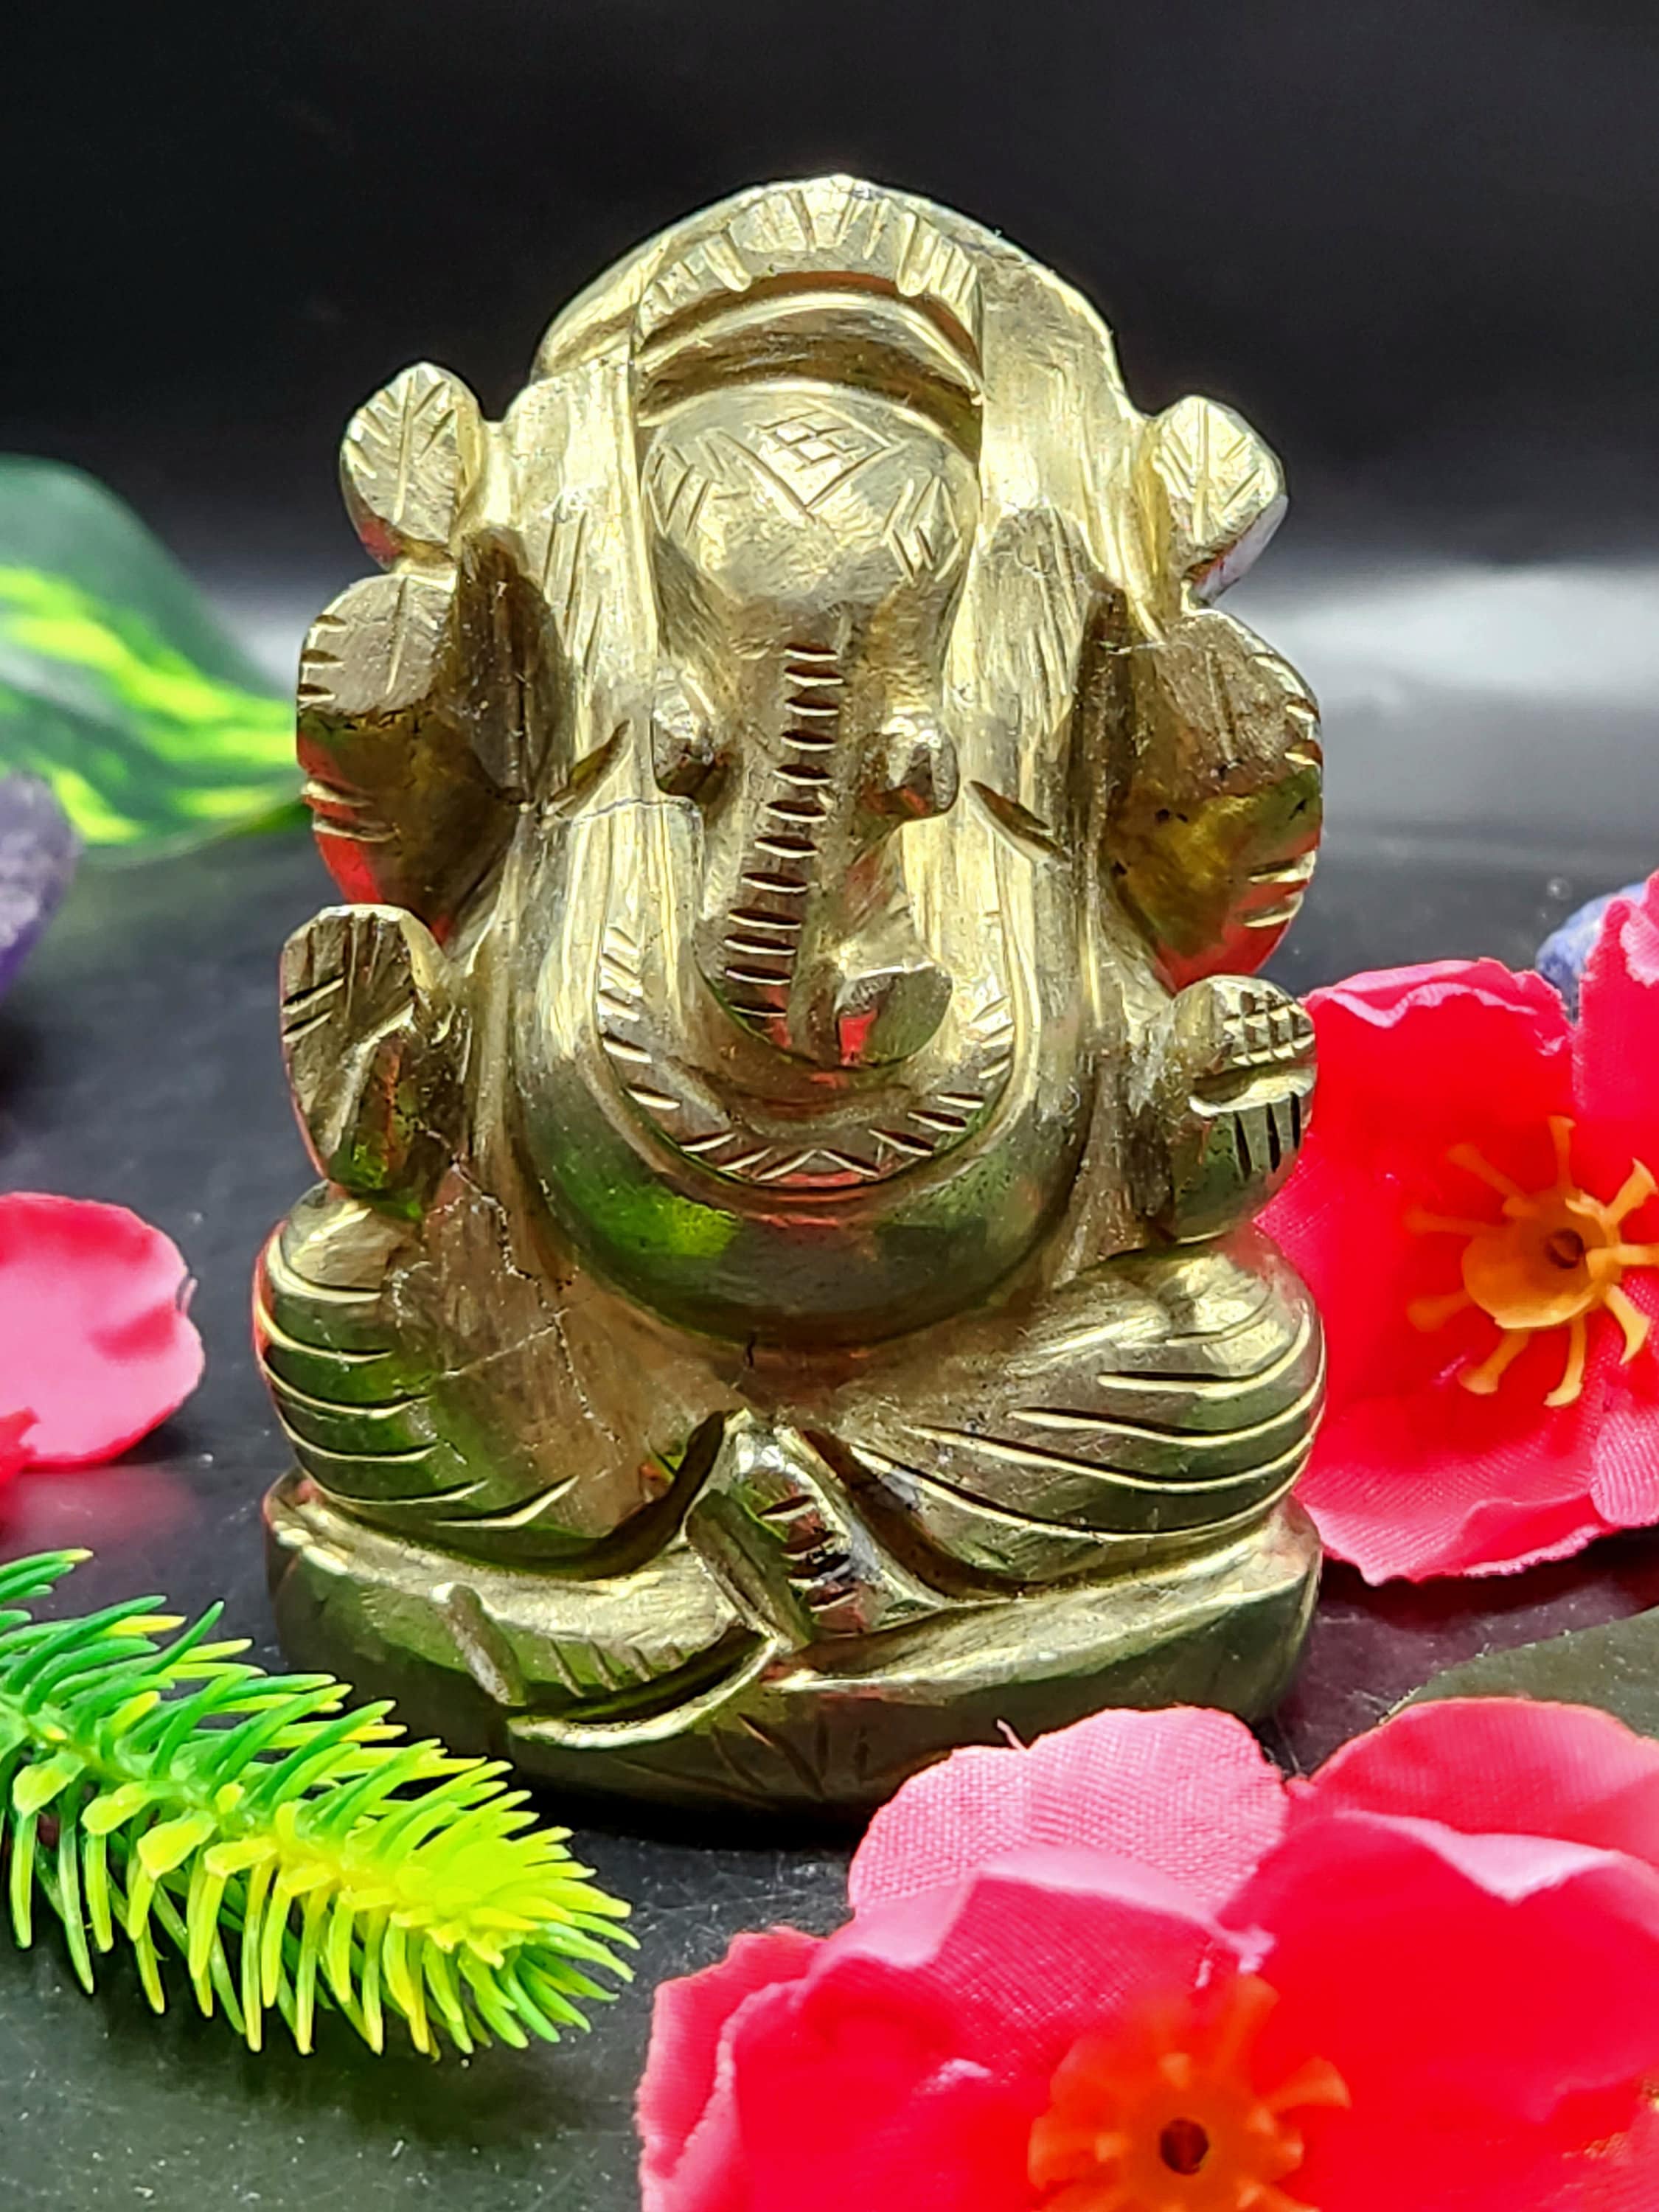 Pyrite stone Handmade Carving of Ganesh - Lord Ganesha Idol | Figurine in Crystals and Gemstones - 3 inches and 370 gms - ONE STATUE ONLY